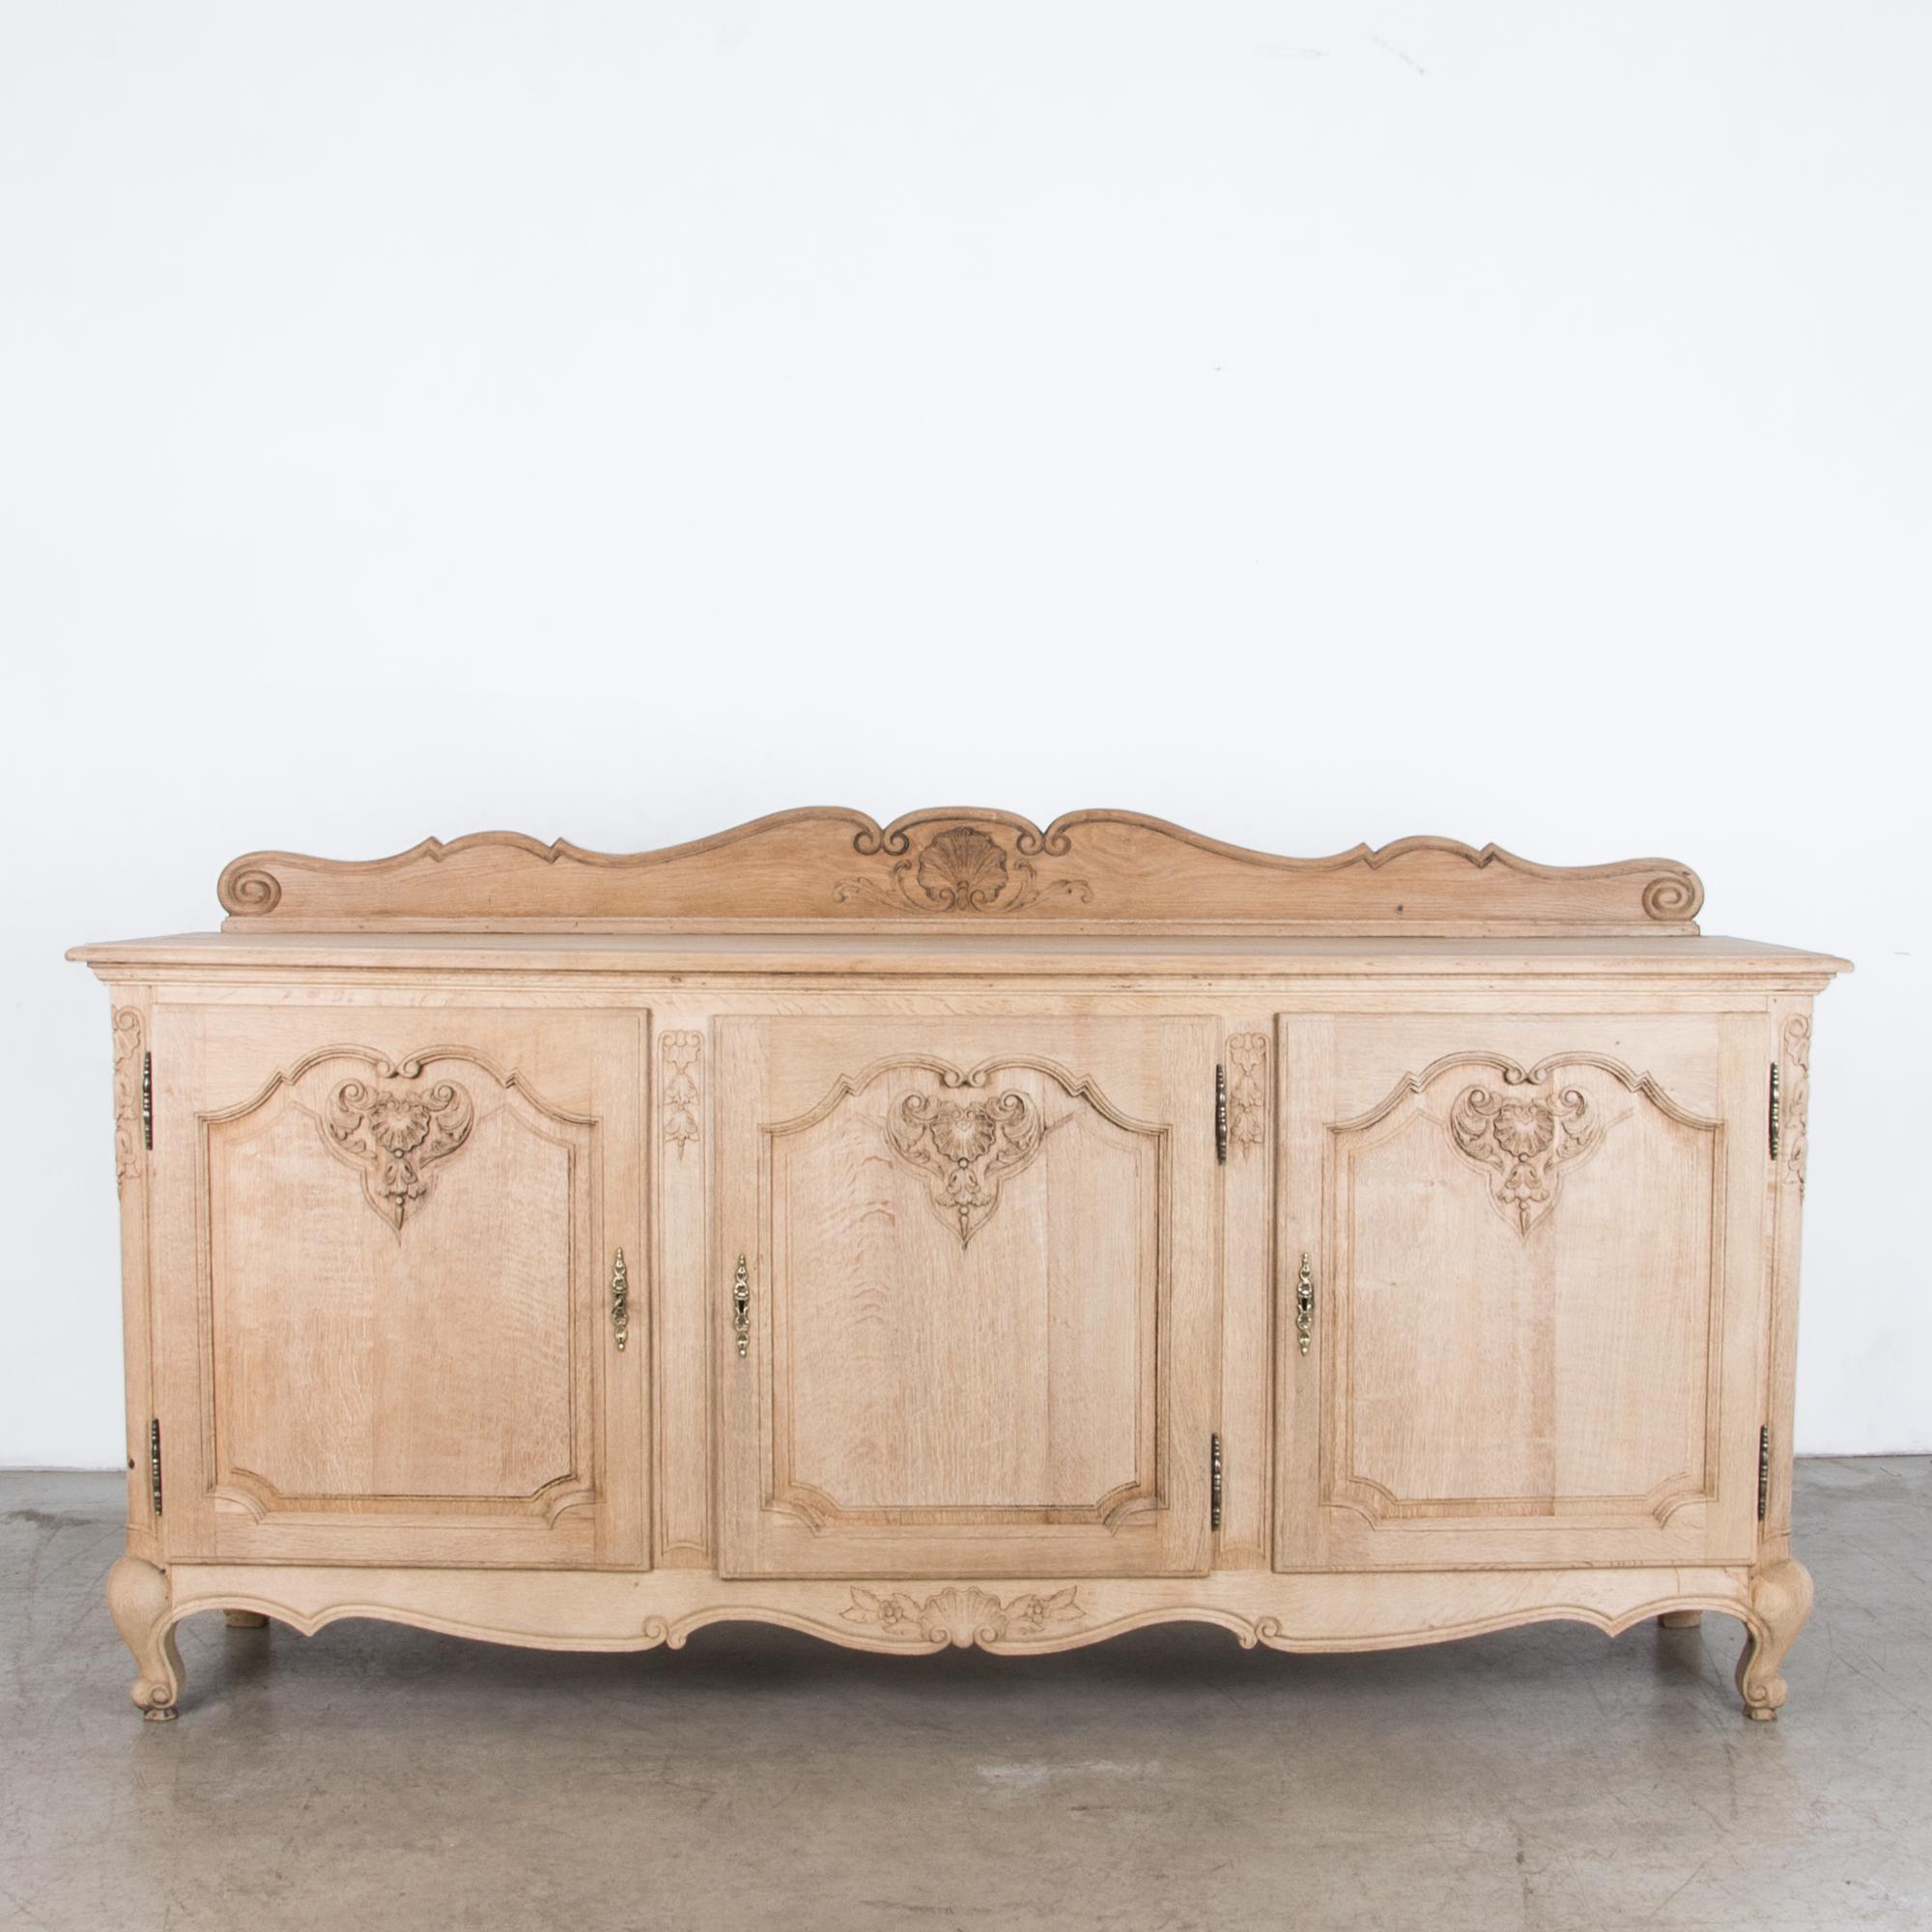 From circa 1950, a three-door and drawer cabinet in oak with drawer storage and carved wooden surround. A style inspired by earlier French provincial interior, influenced by the furniture and homes of Southern France, interpreted by the eyes of